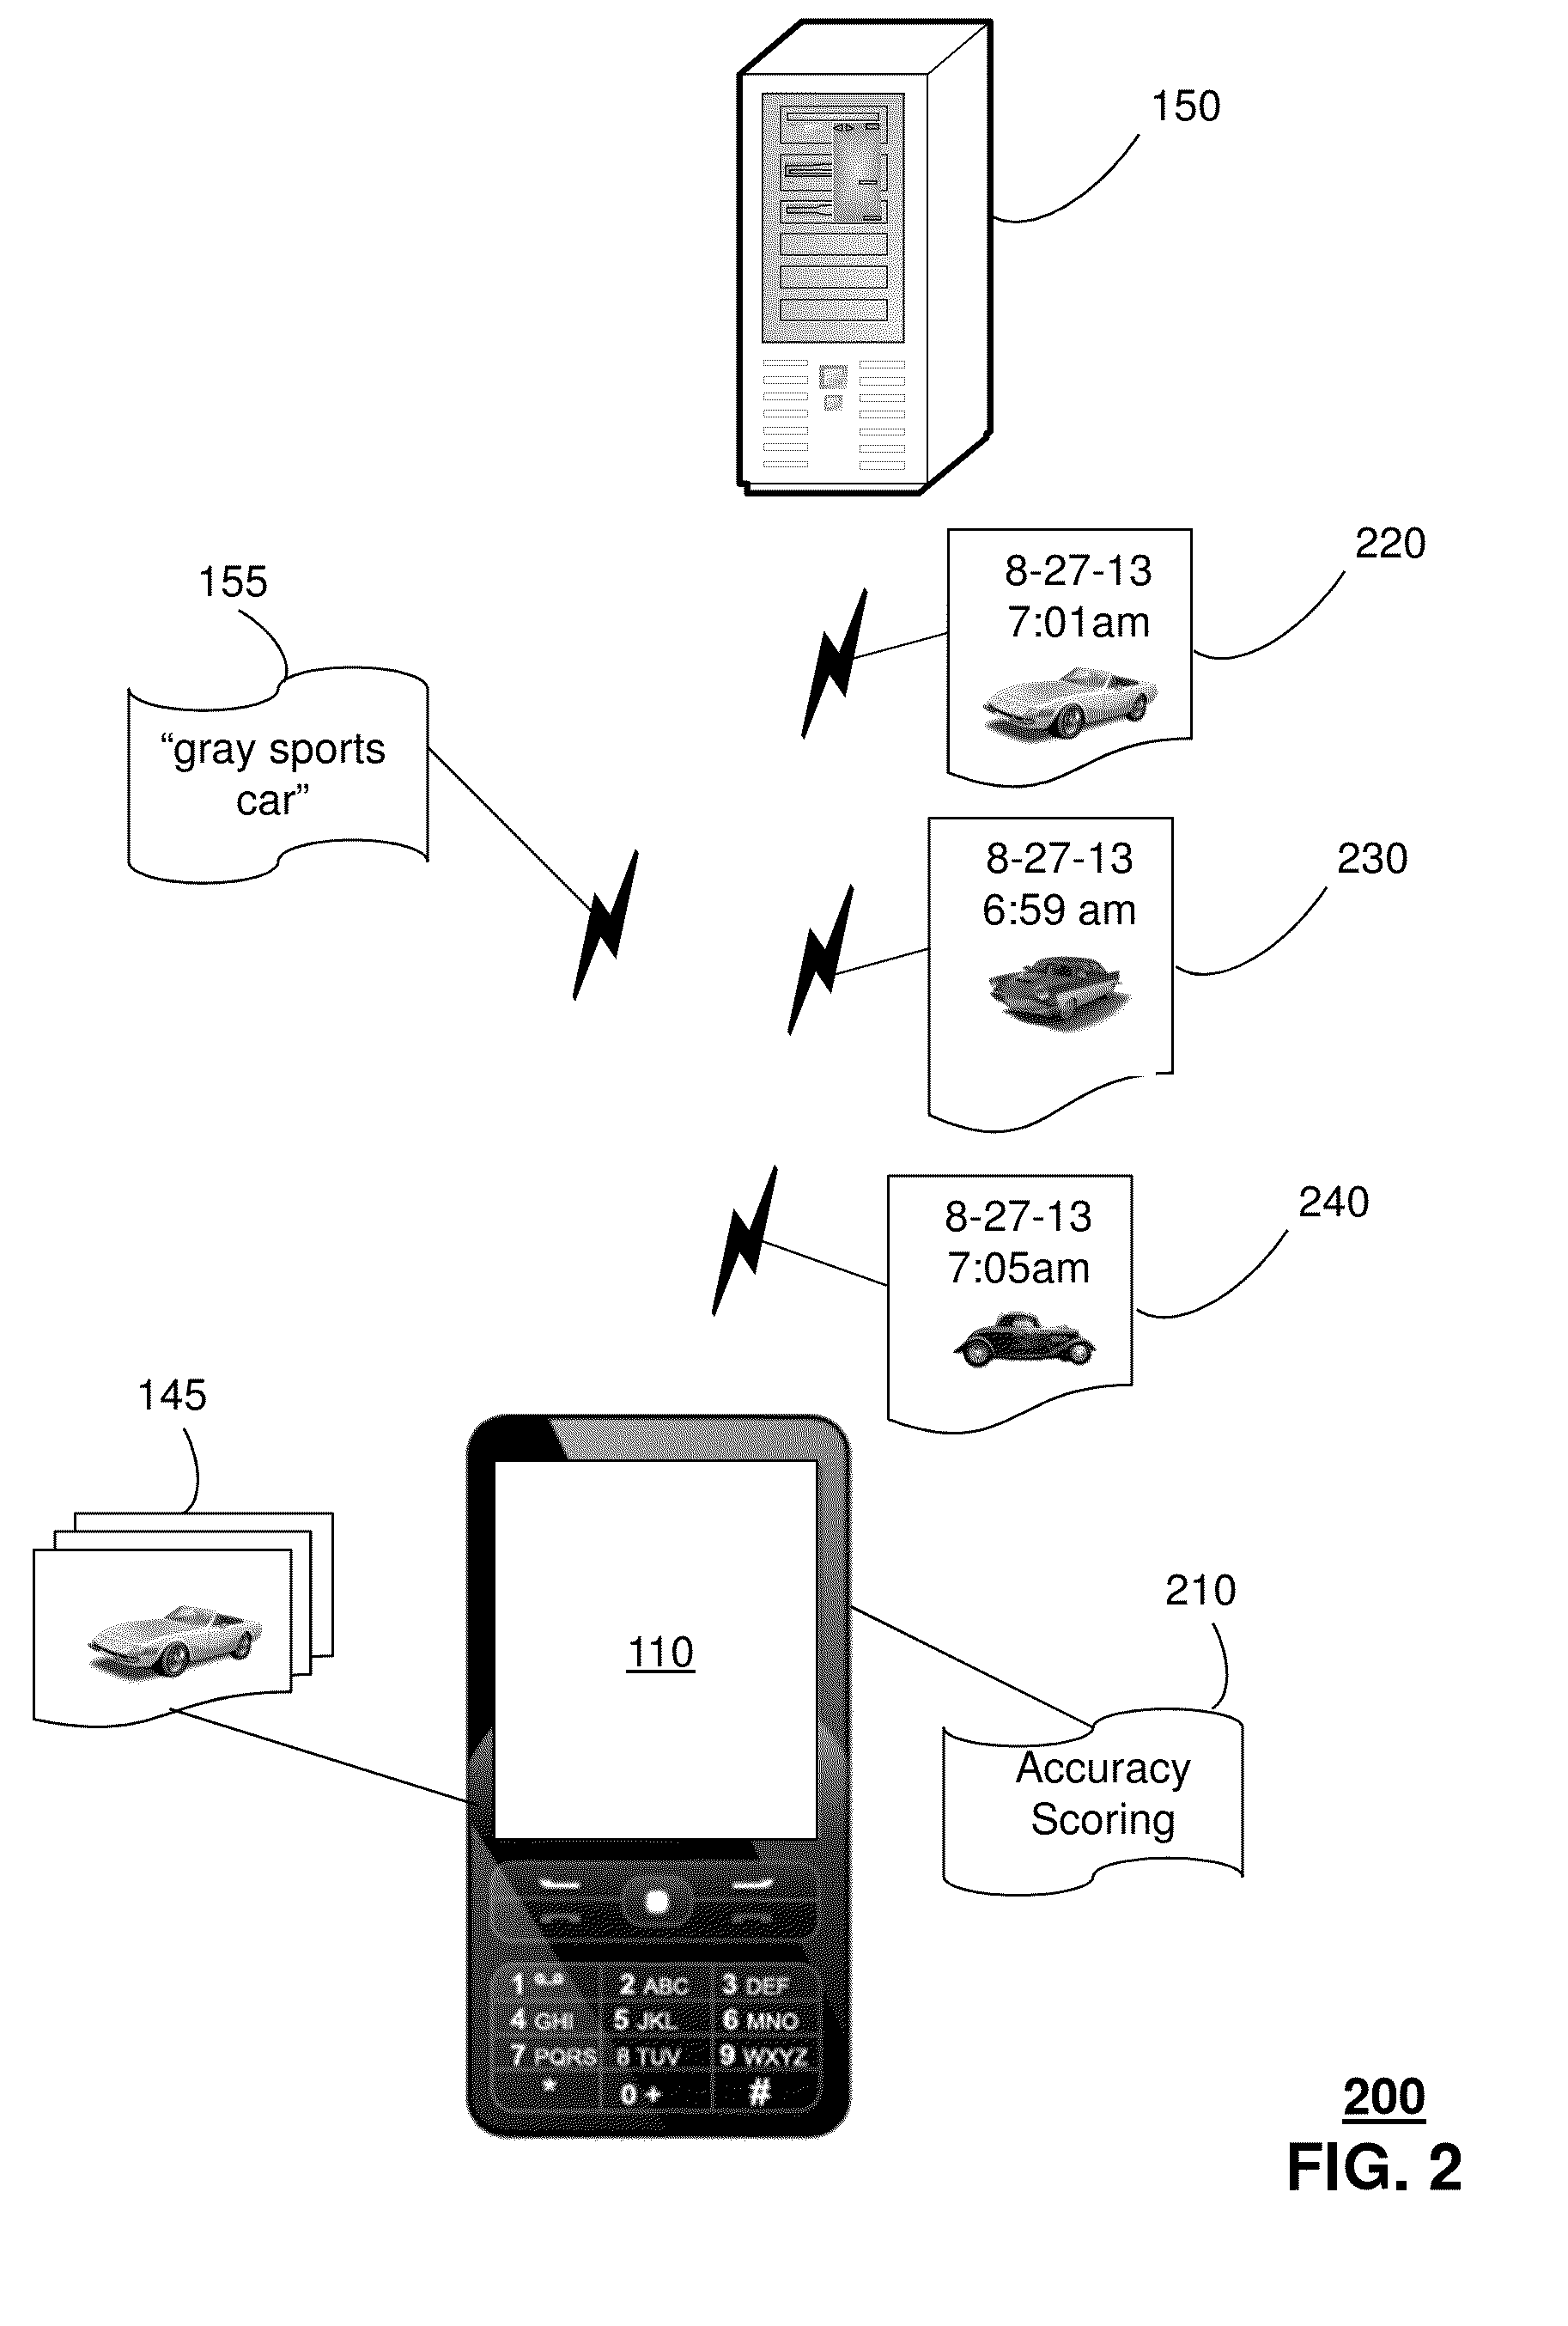 Method and apparatus for image collection and analysis